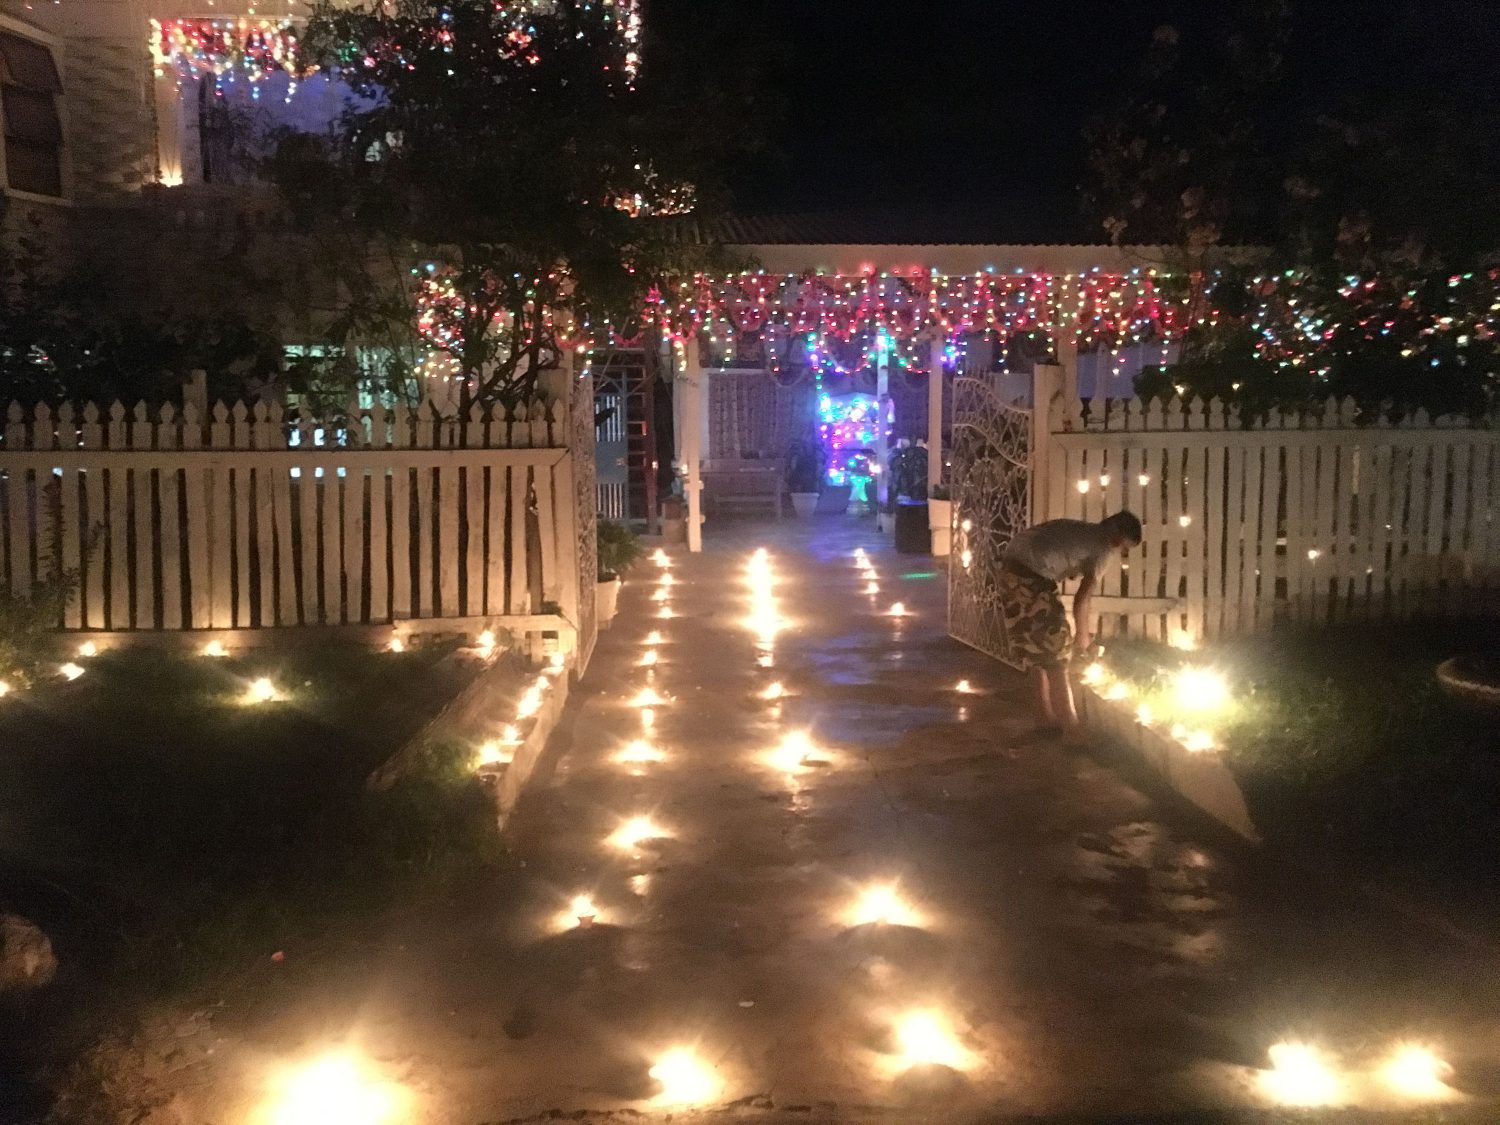 A house in Turkeyen, Greater Georgetown, festooned with diyas and fairy lights last night. 